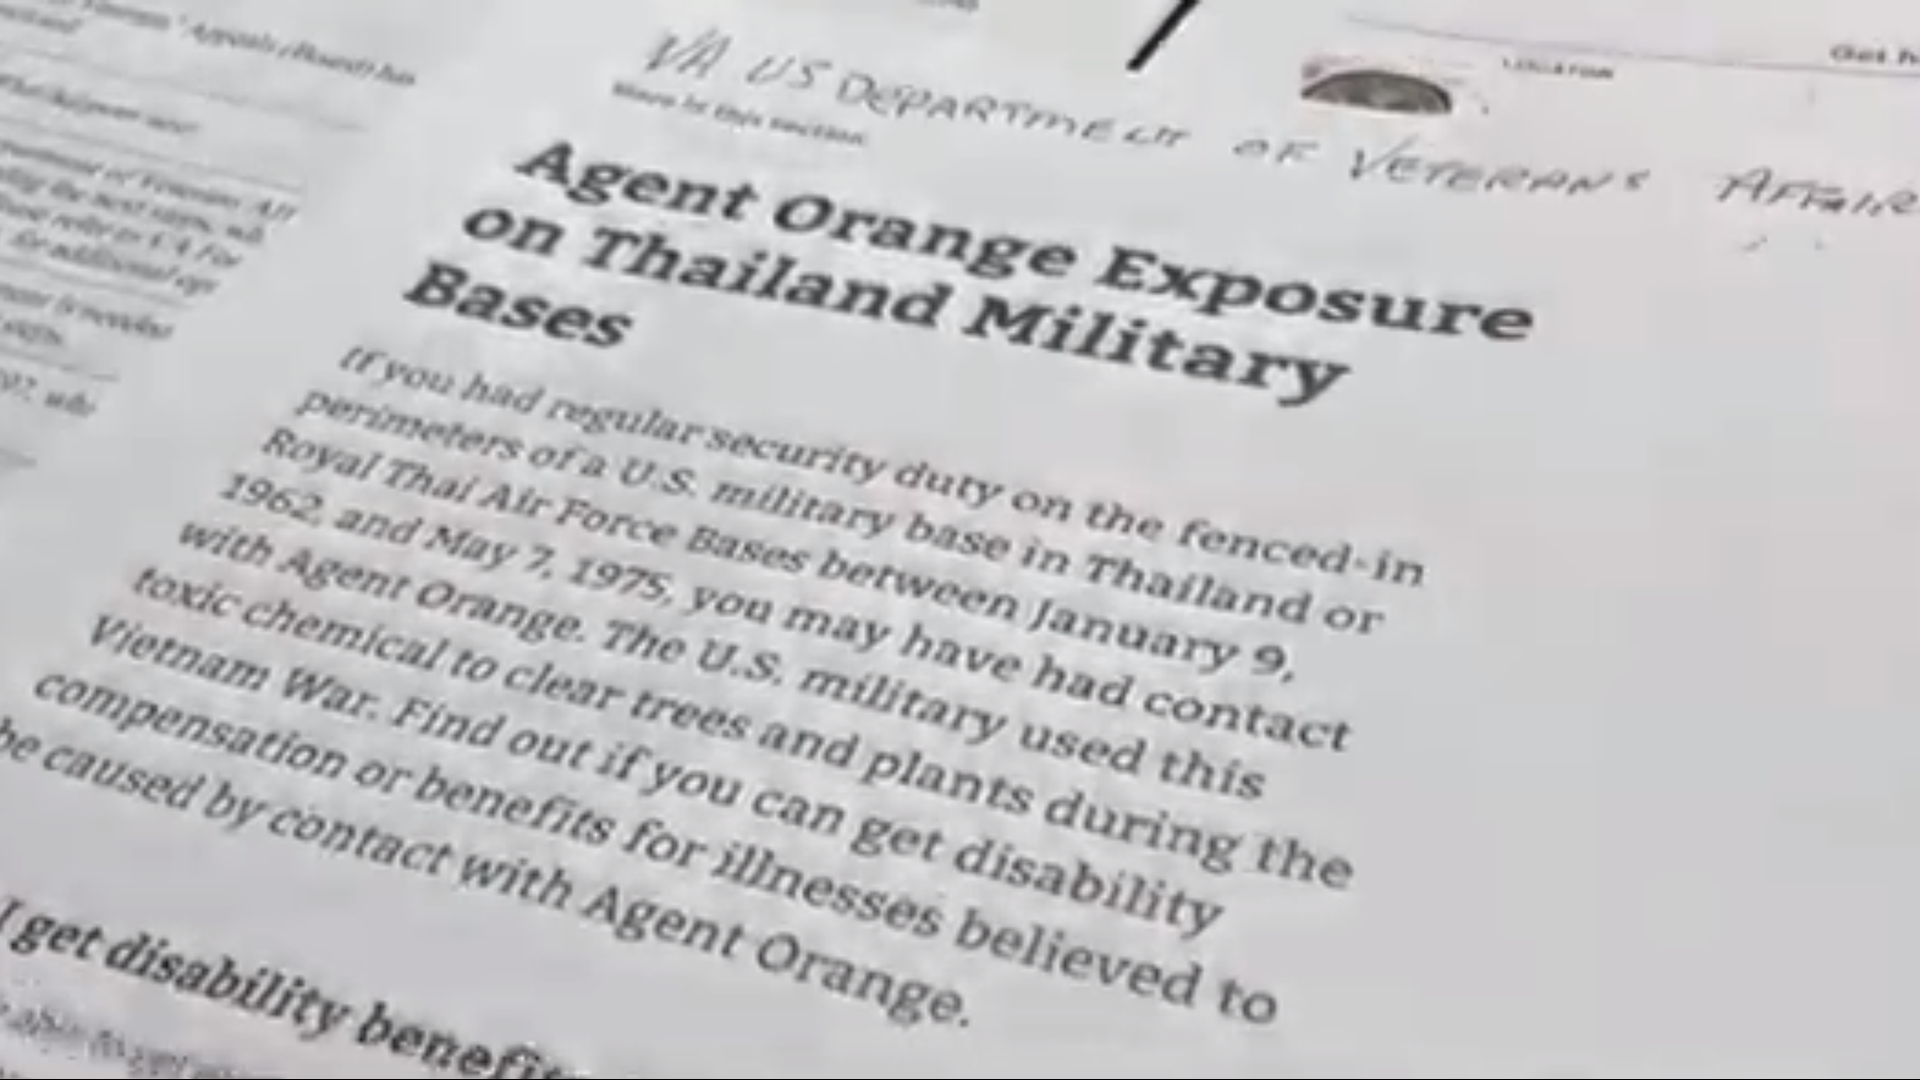 A new House bill could extend benefits for Vietnam veterans who were exposed to herbicides, like Agent Orange, in Thailand.